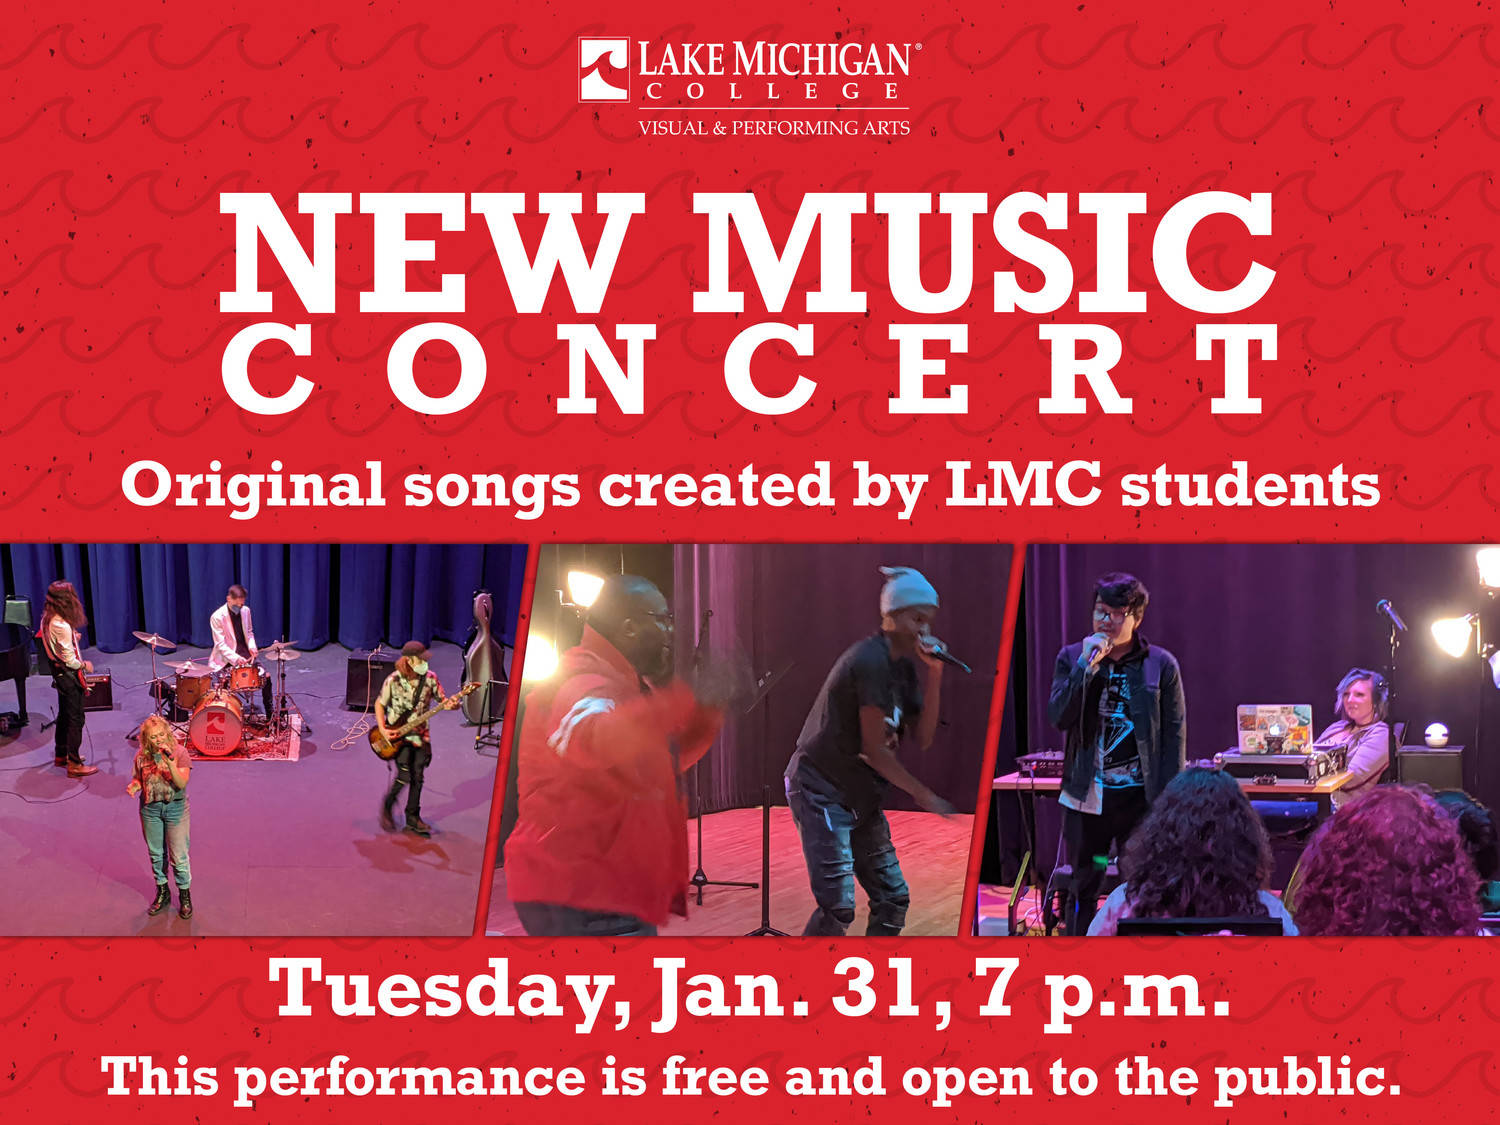 LMC Visual & Performing Arts students to perform during New Music Concert on Jan. 31